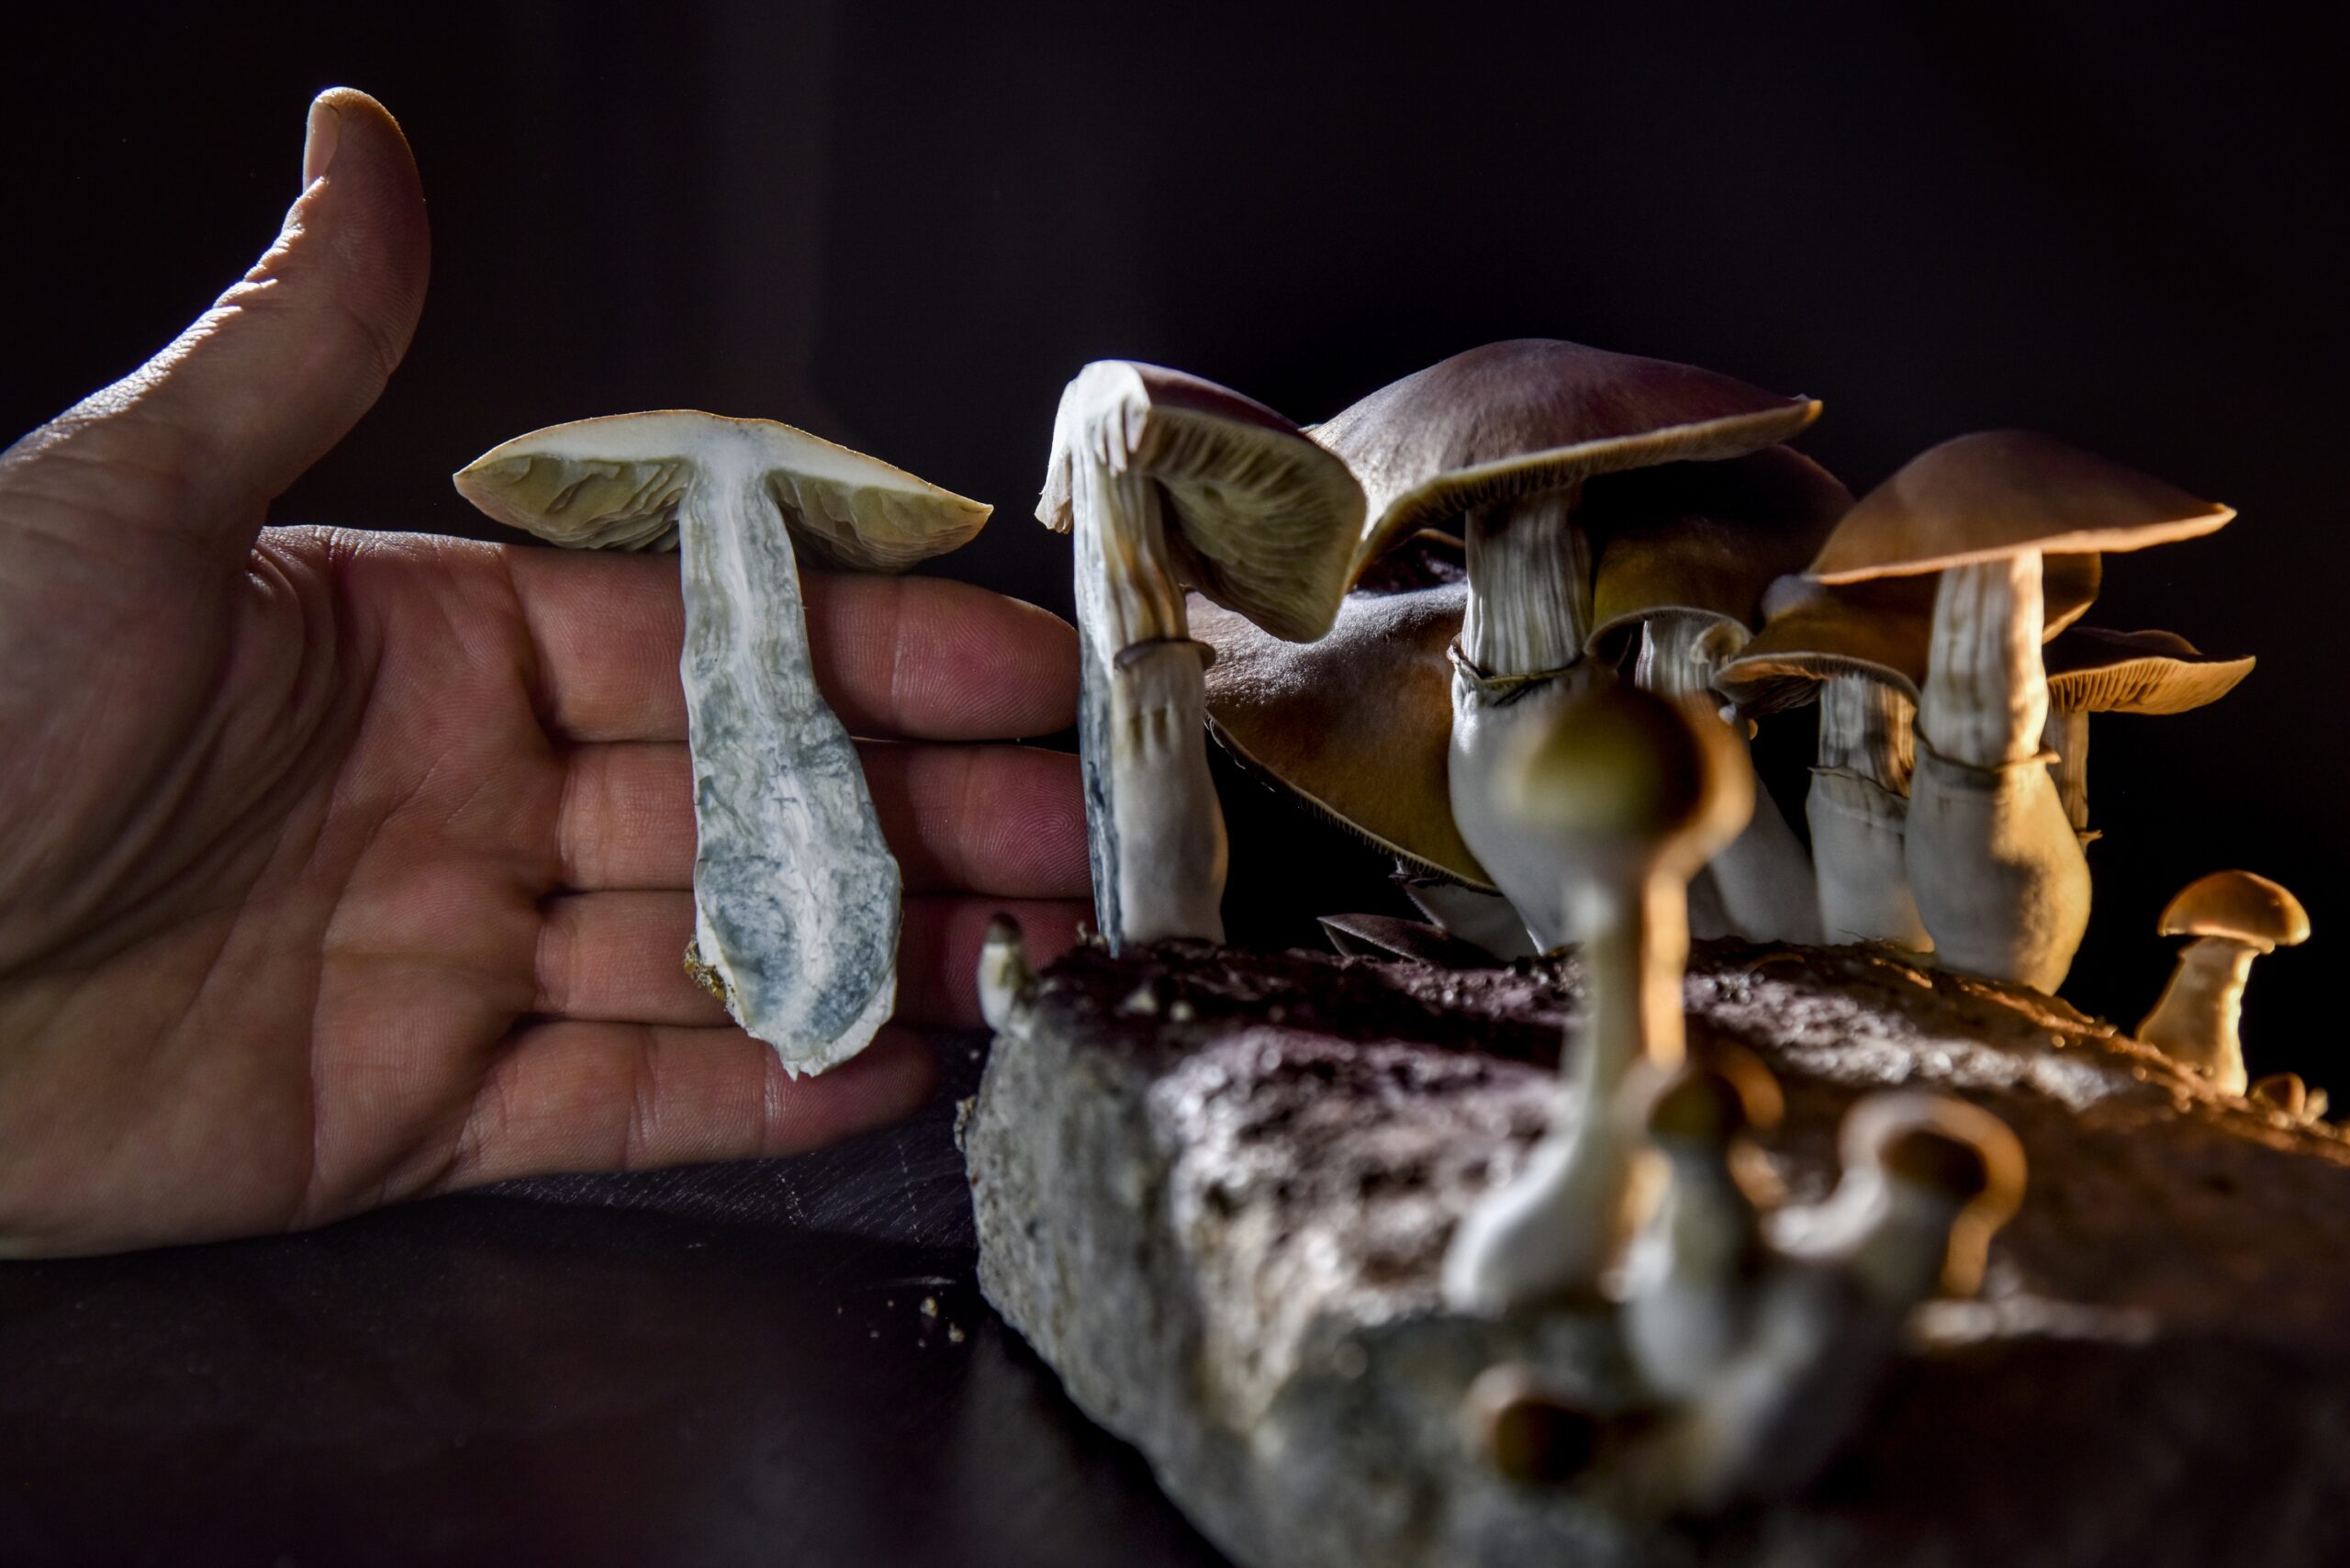 Magic Mushroom Experts Descend on SF for Two Expos in April